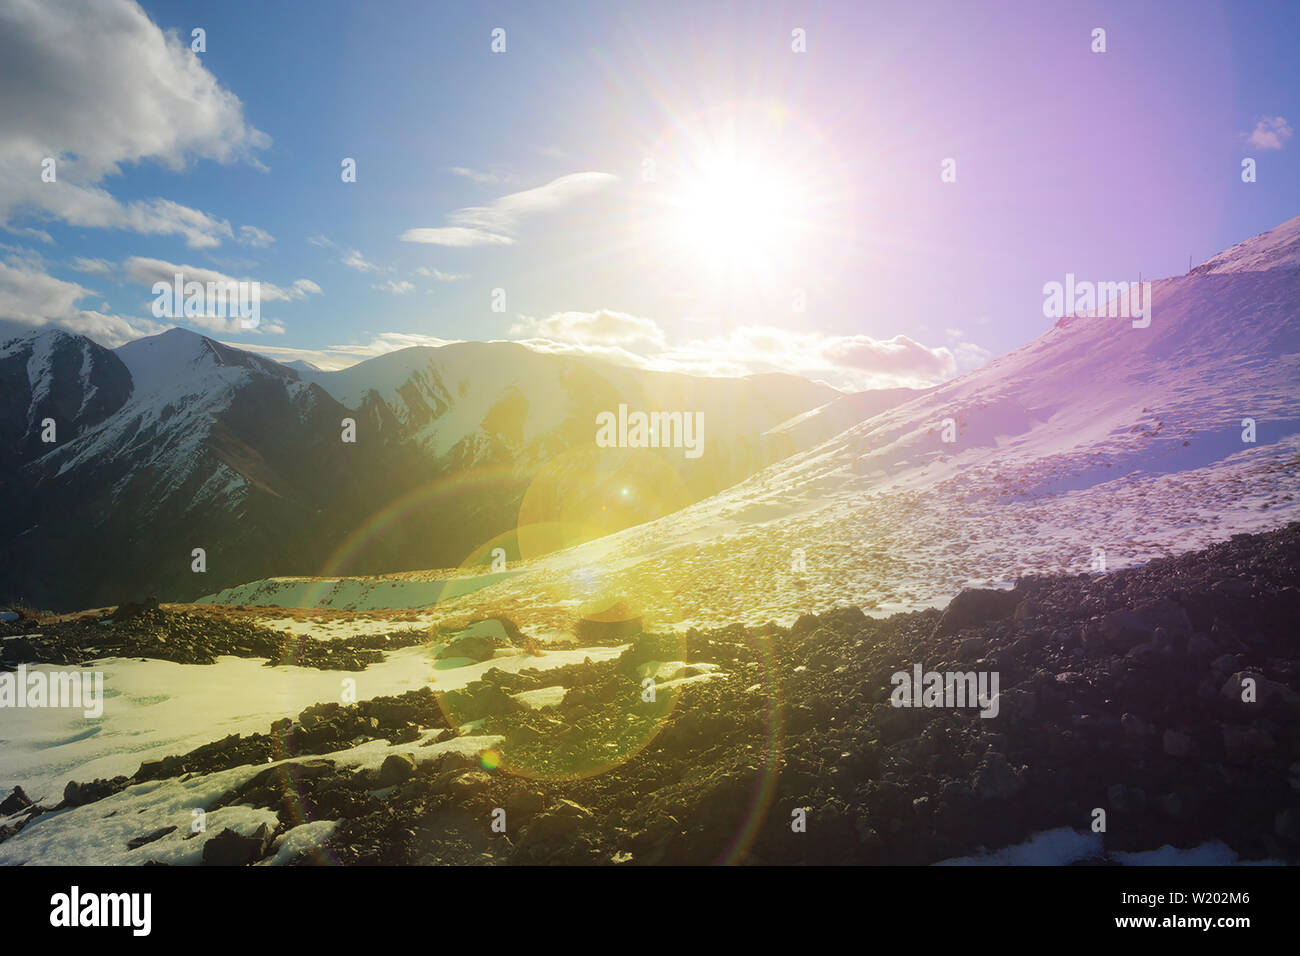 Snow Mountains in New Zealand atmosphere Stock Photo